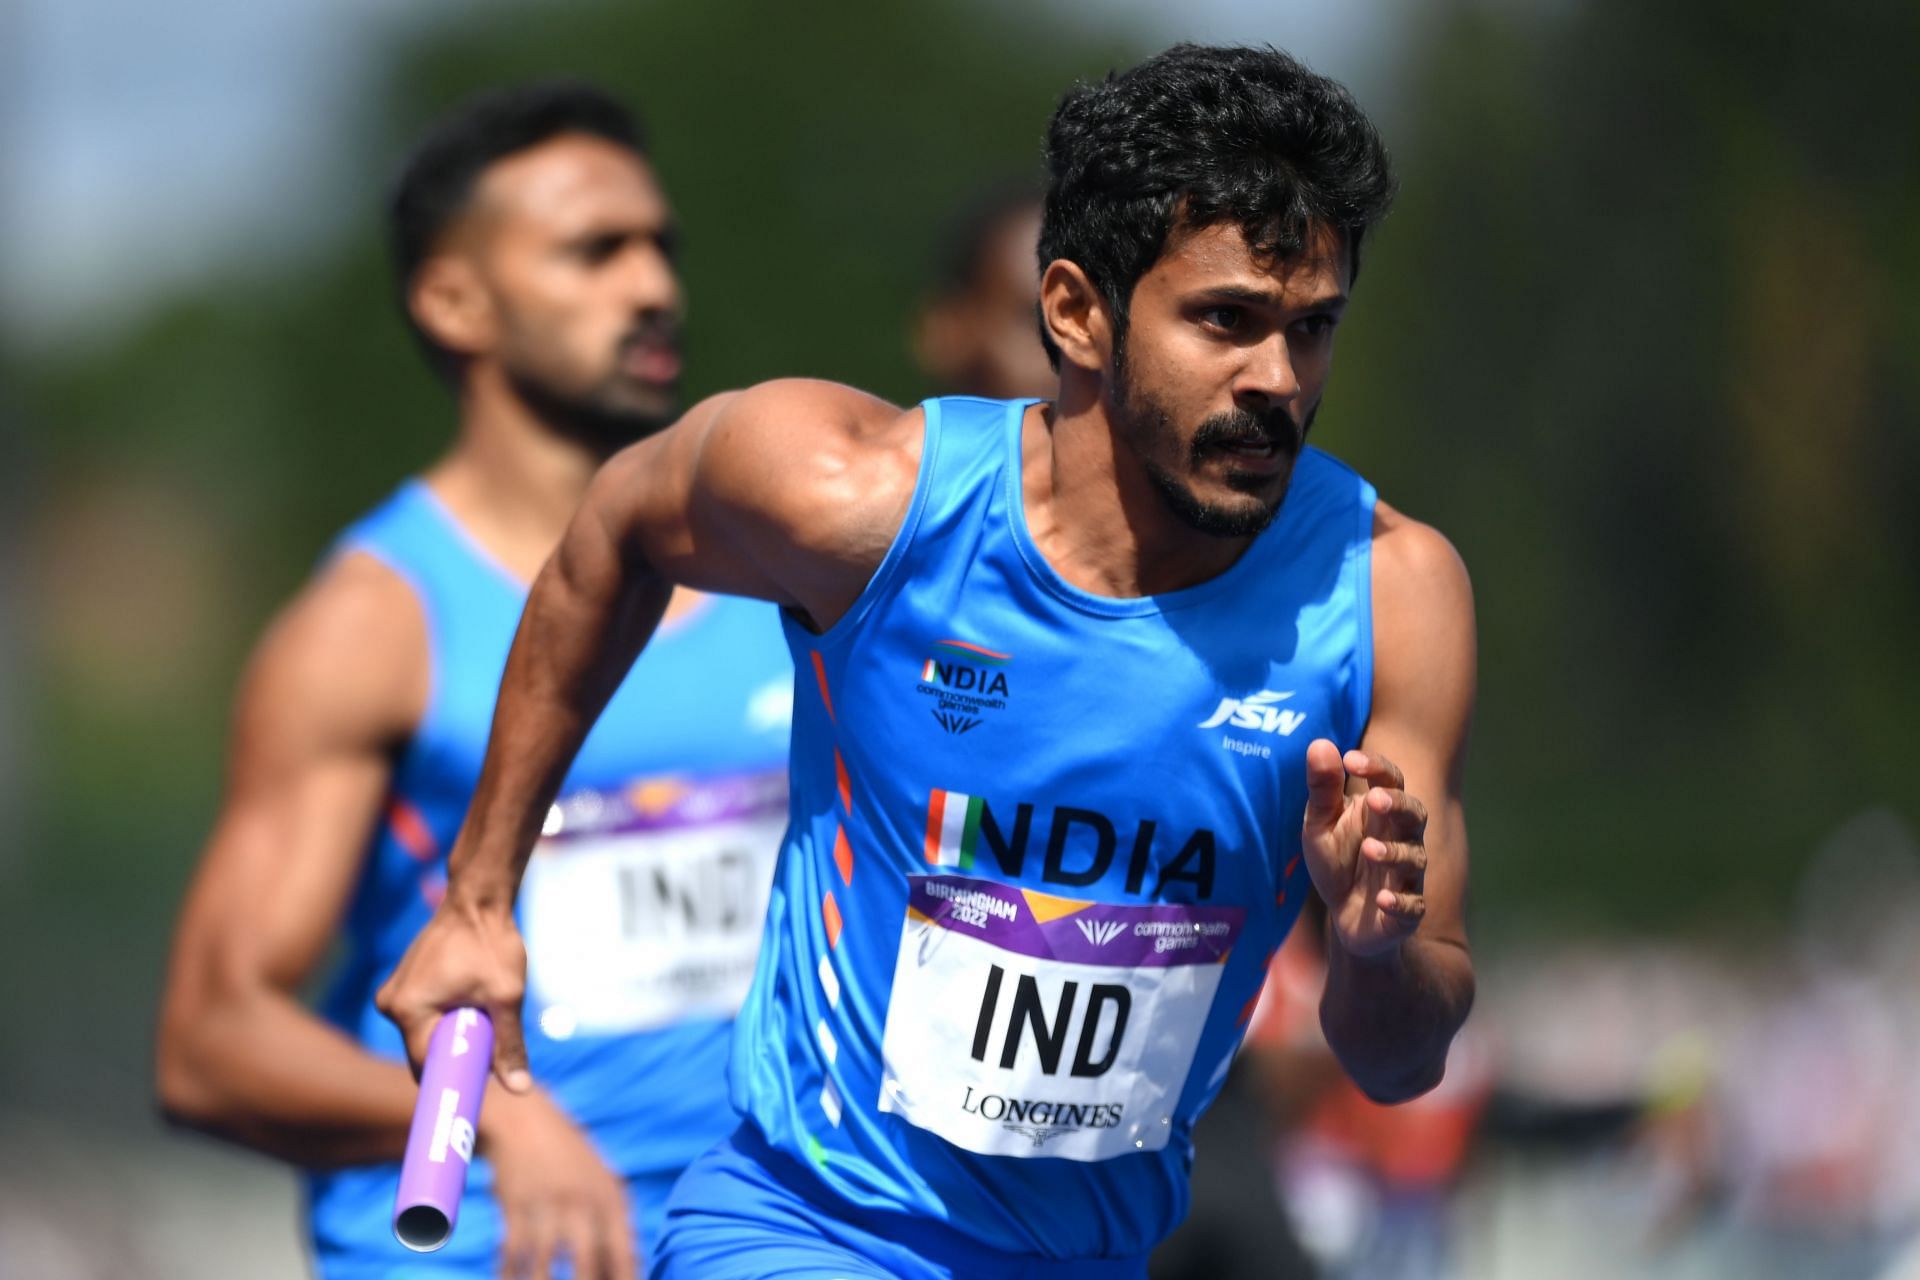 Noah Nirmal Tom during the men&#039;s 4x400m (Round 1, Heat 2) at CWG 2022 in Birmingham. (Getty Images)